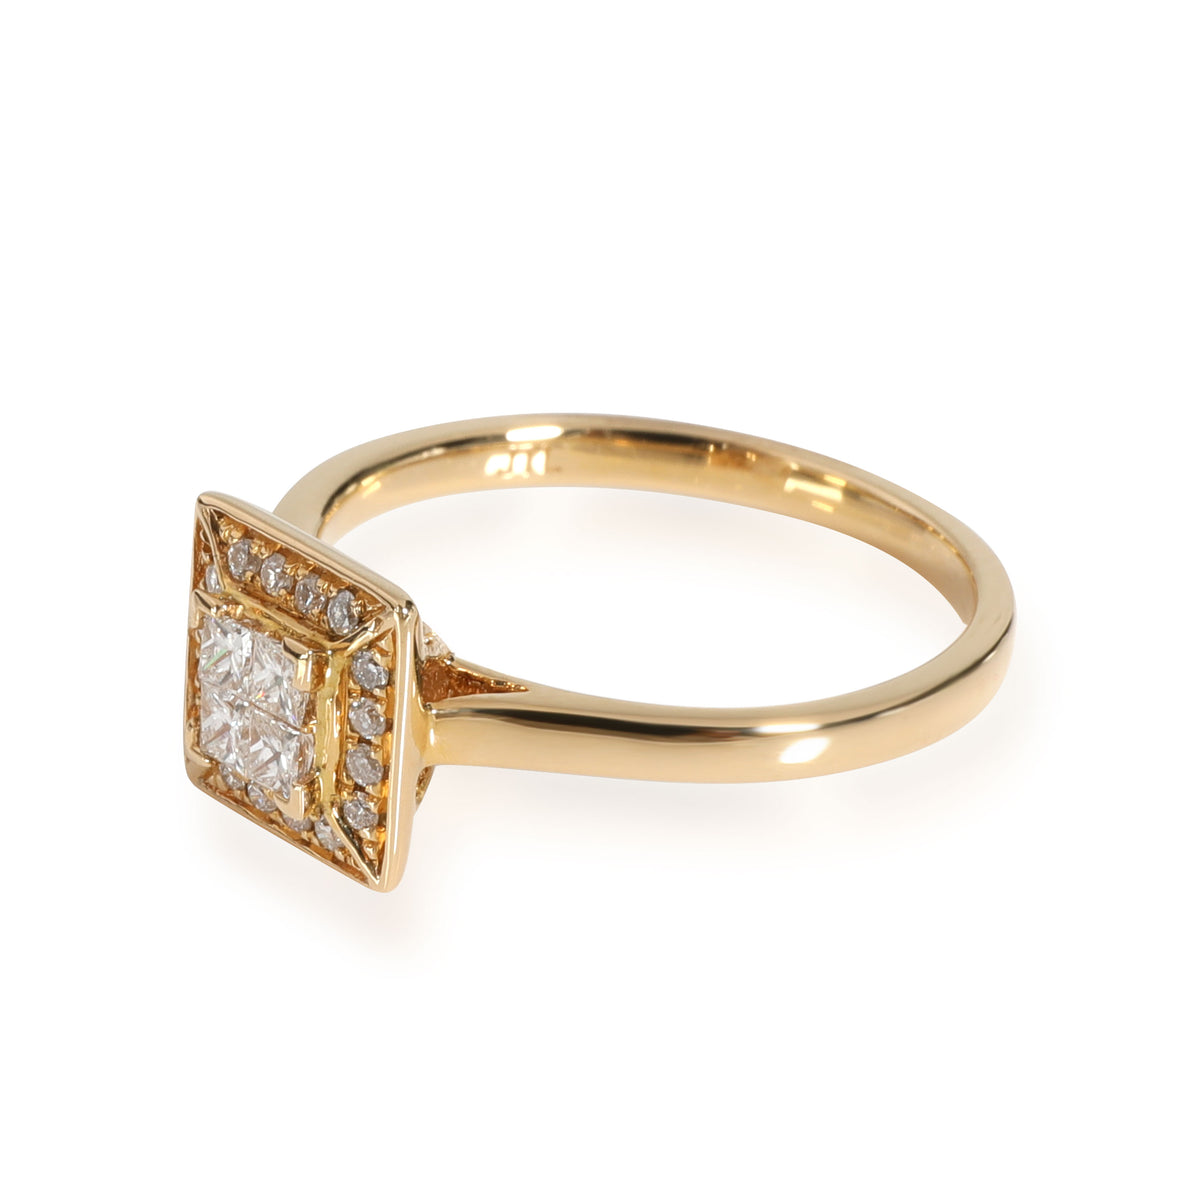 Invisible Set Square Diamond Ring in 18K Yellow Gold 0.24 CTW